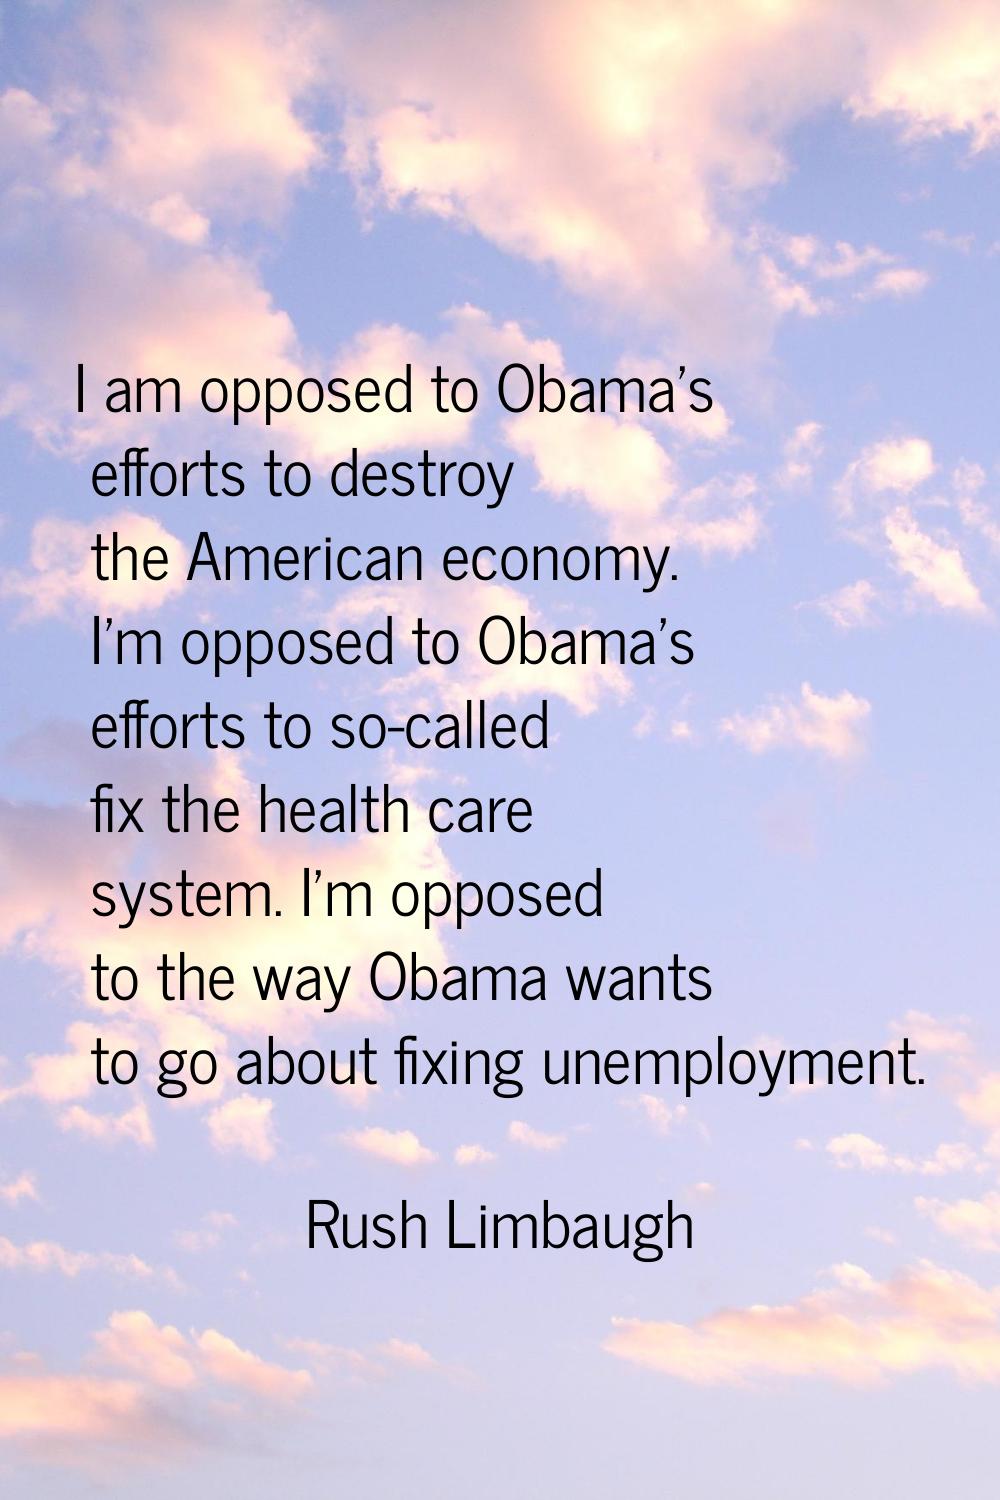 I am opposed to Obama's efforts to destroy the American economy. I'm opposed to Obama's efforts to 